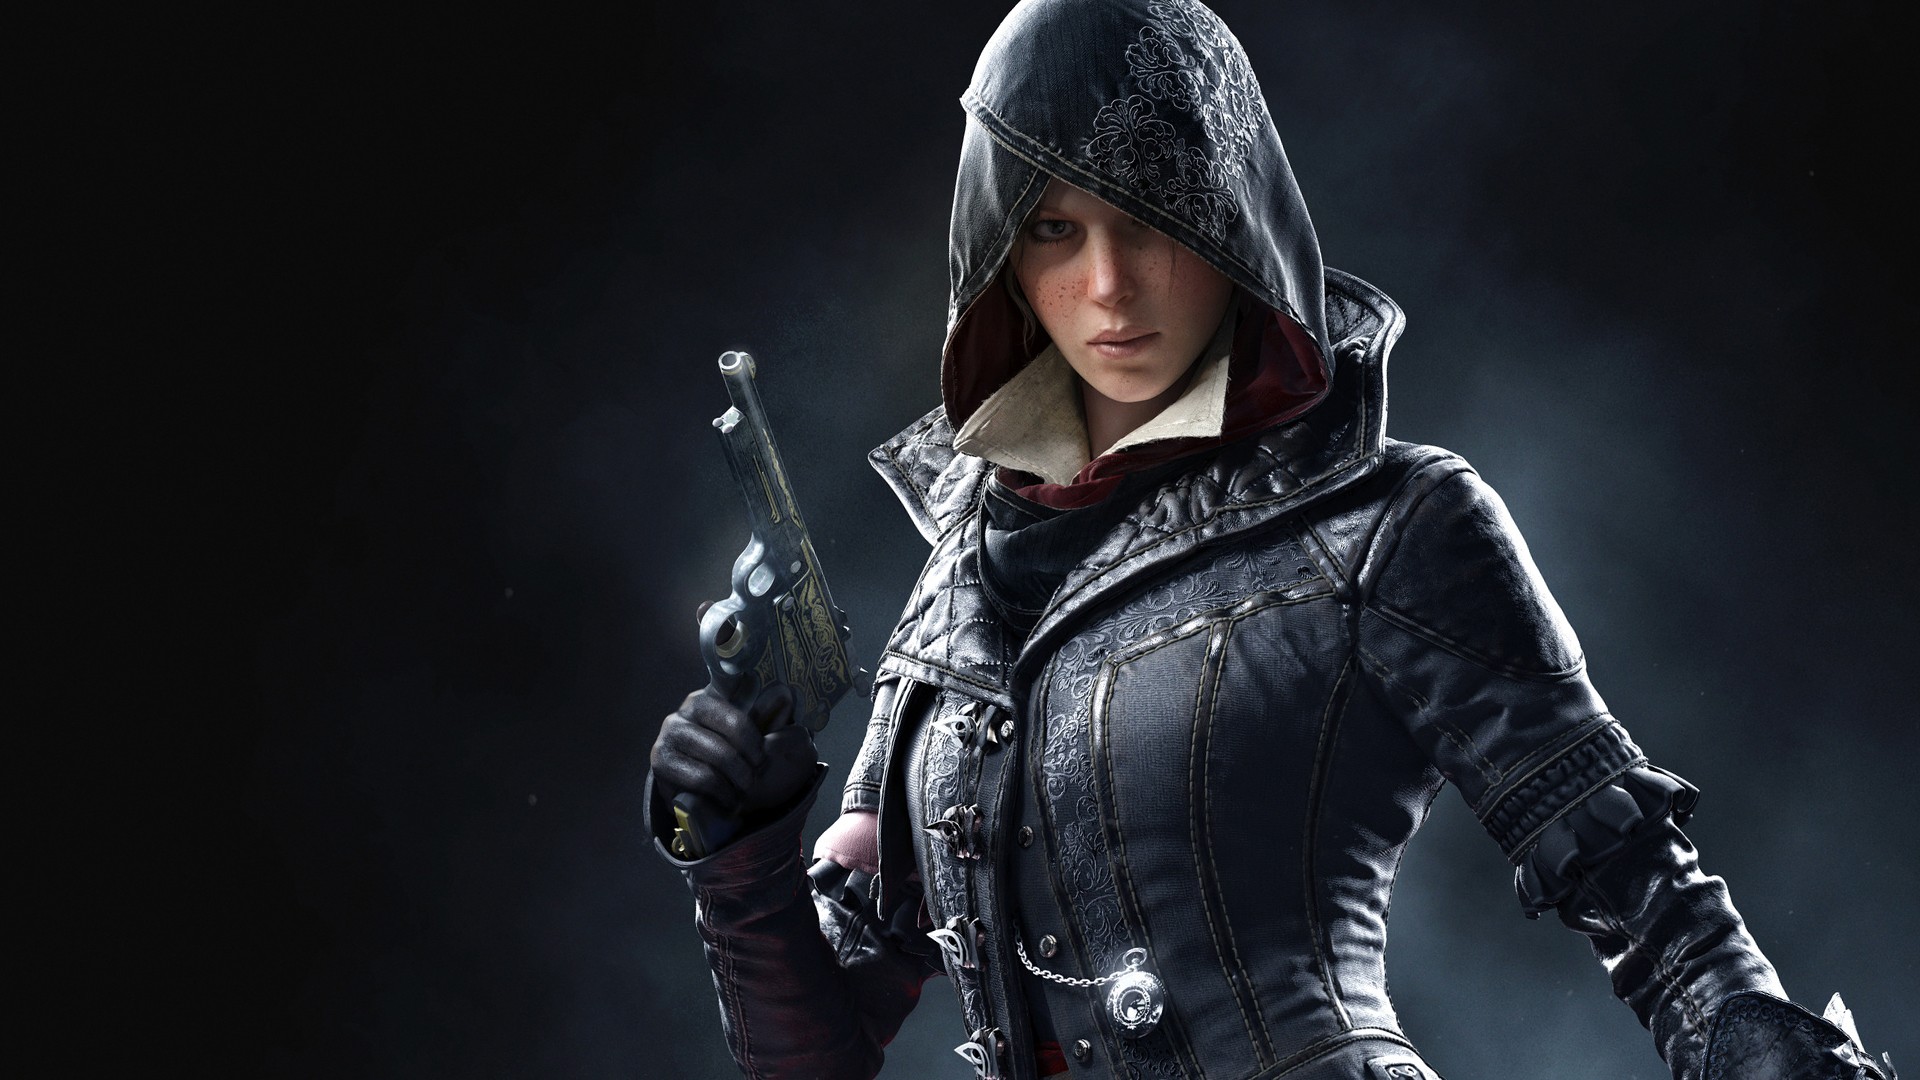 Evie Frye of Assassin's Creed Syndicate marketing art